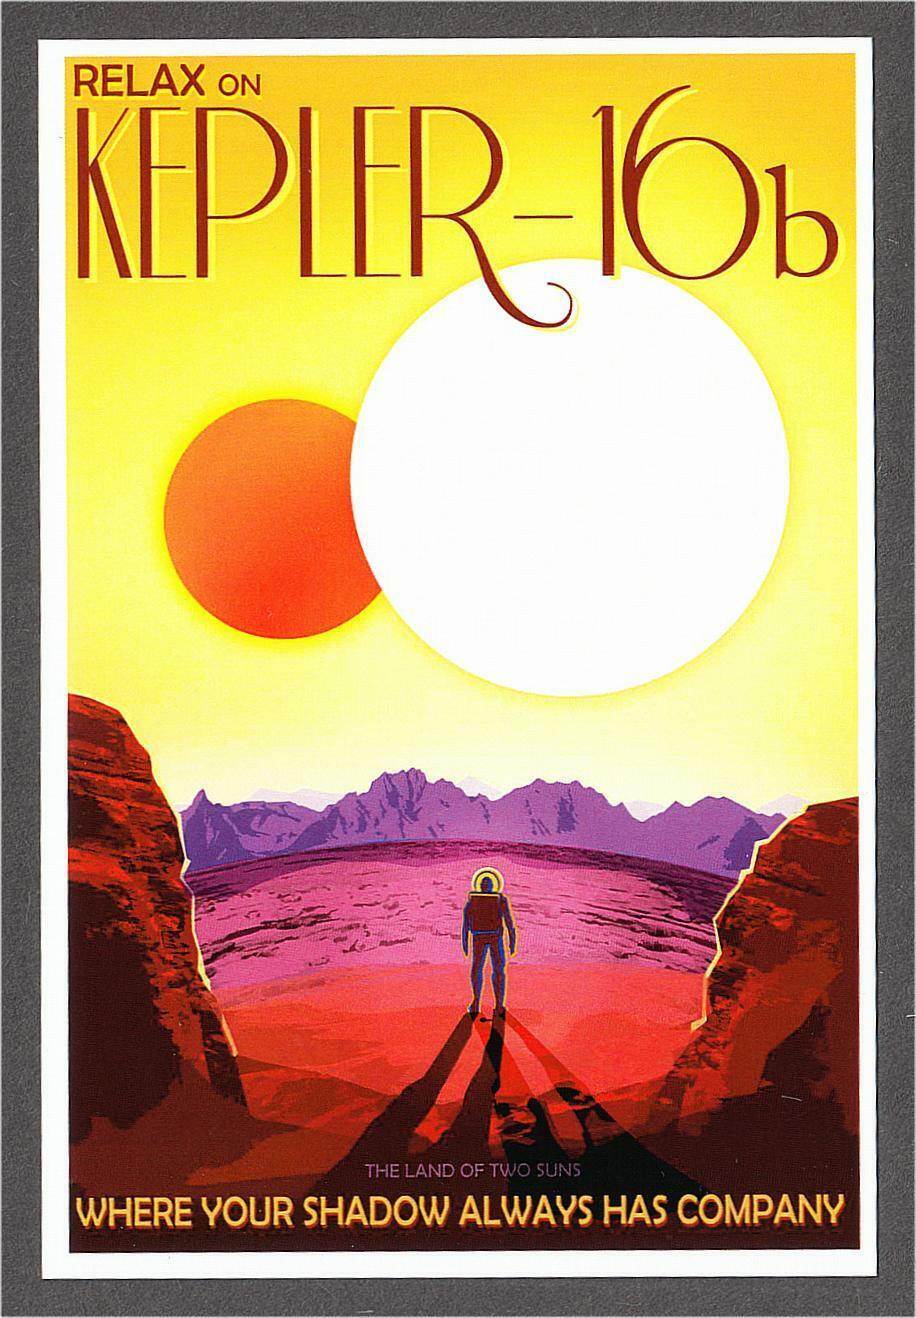 Kepler-16b Exoplanet with Two Suns Space Tourism Travel Poster Style Postcard